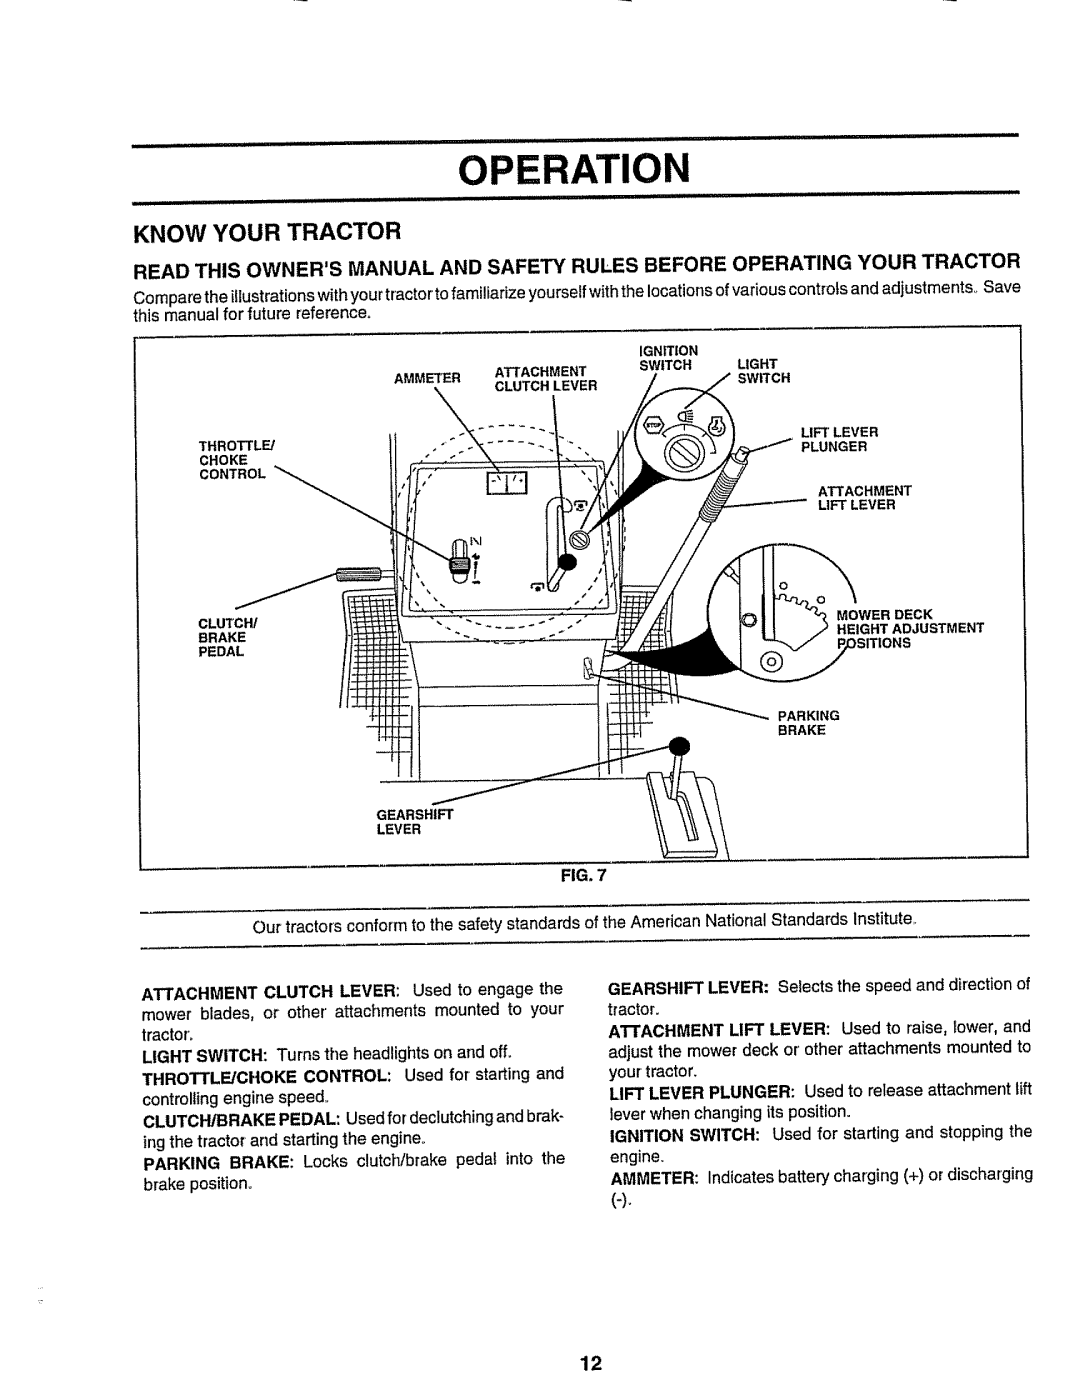 Sears 917.258473 owner manual Know Your Tractor, Operation 